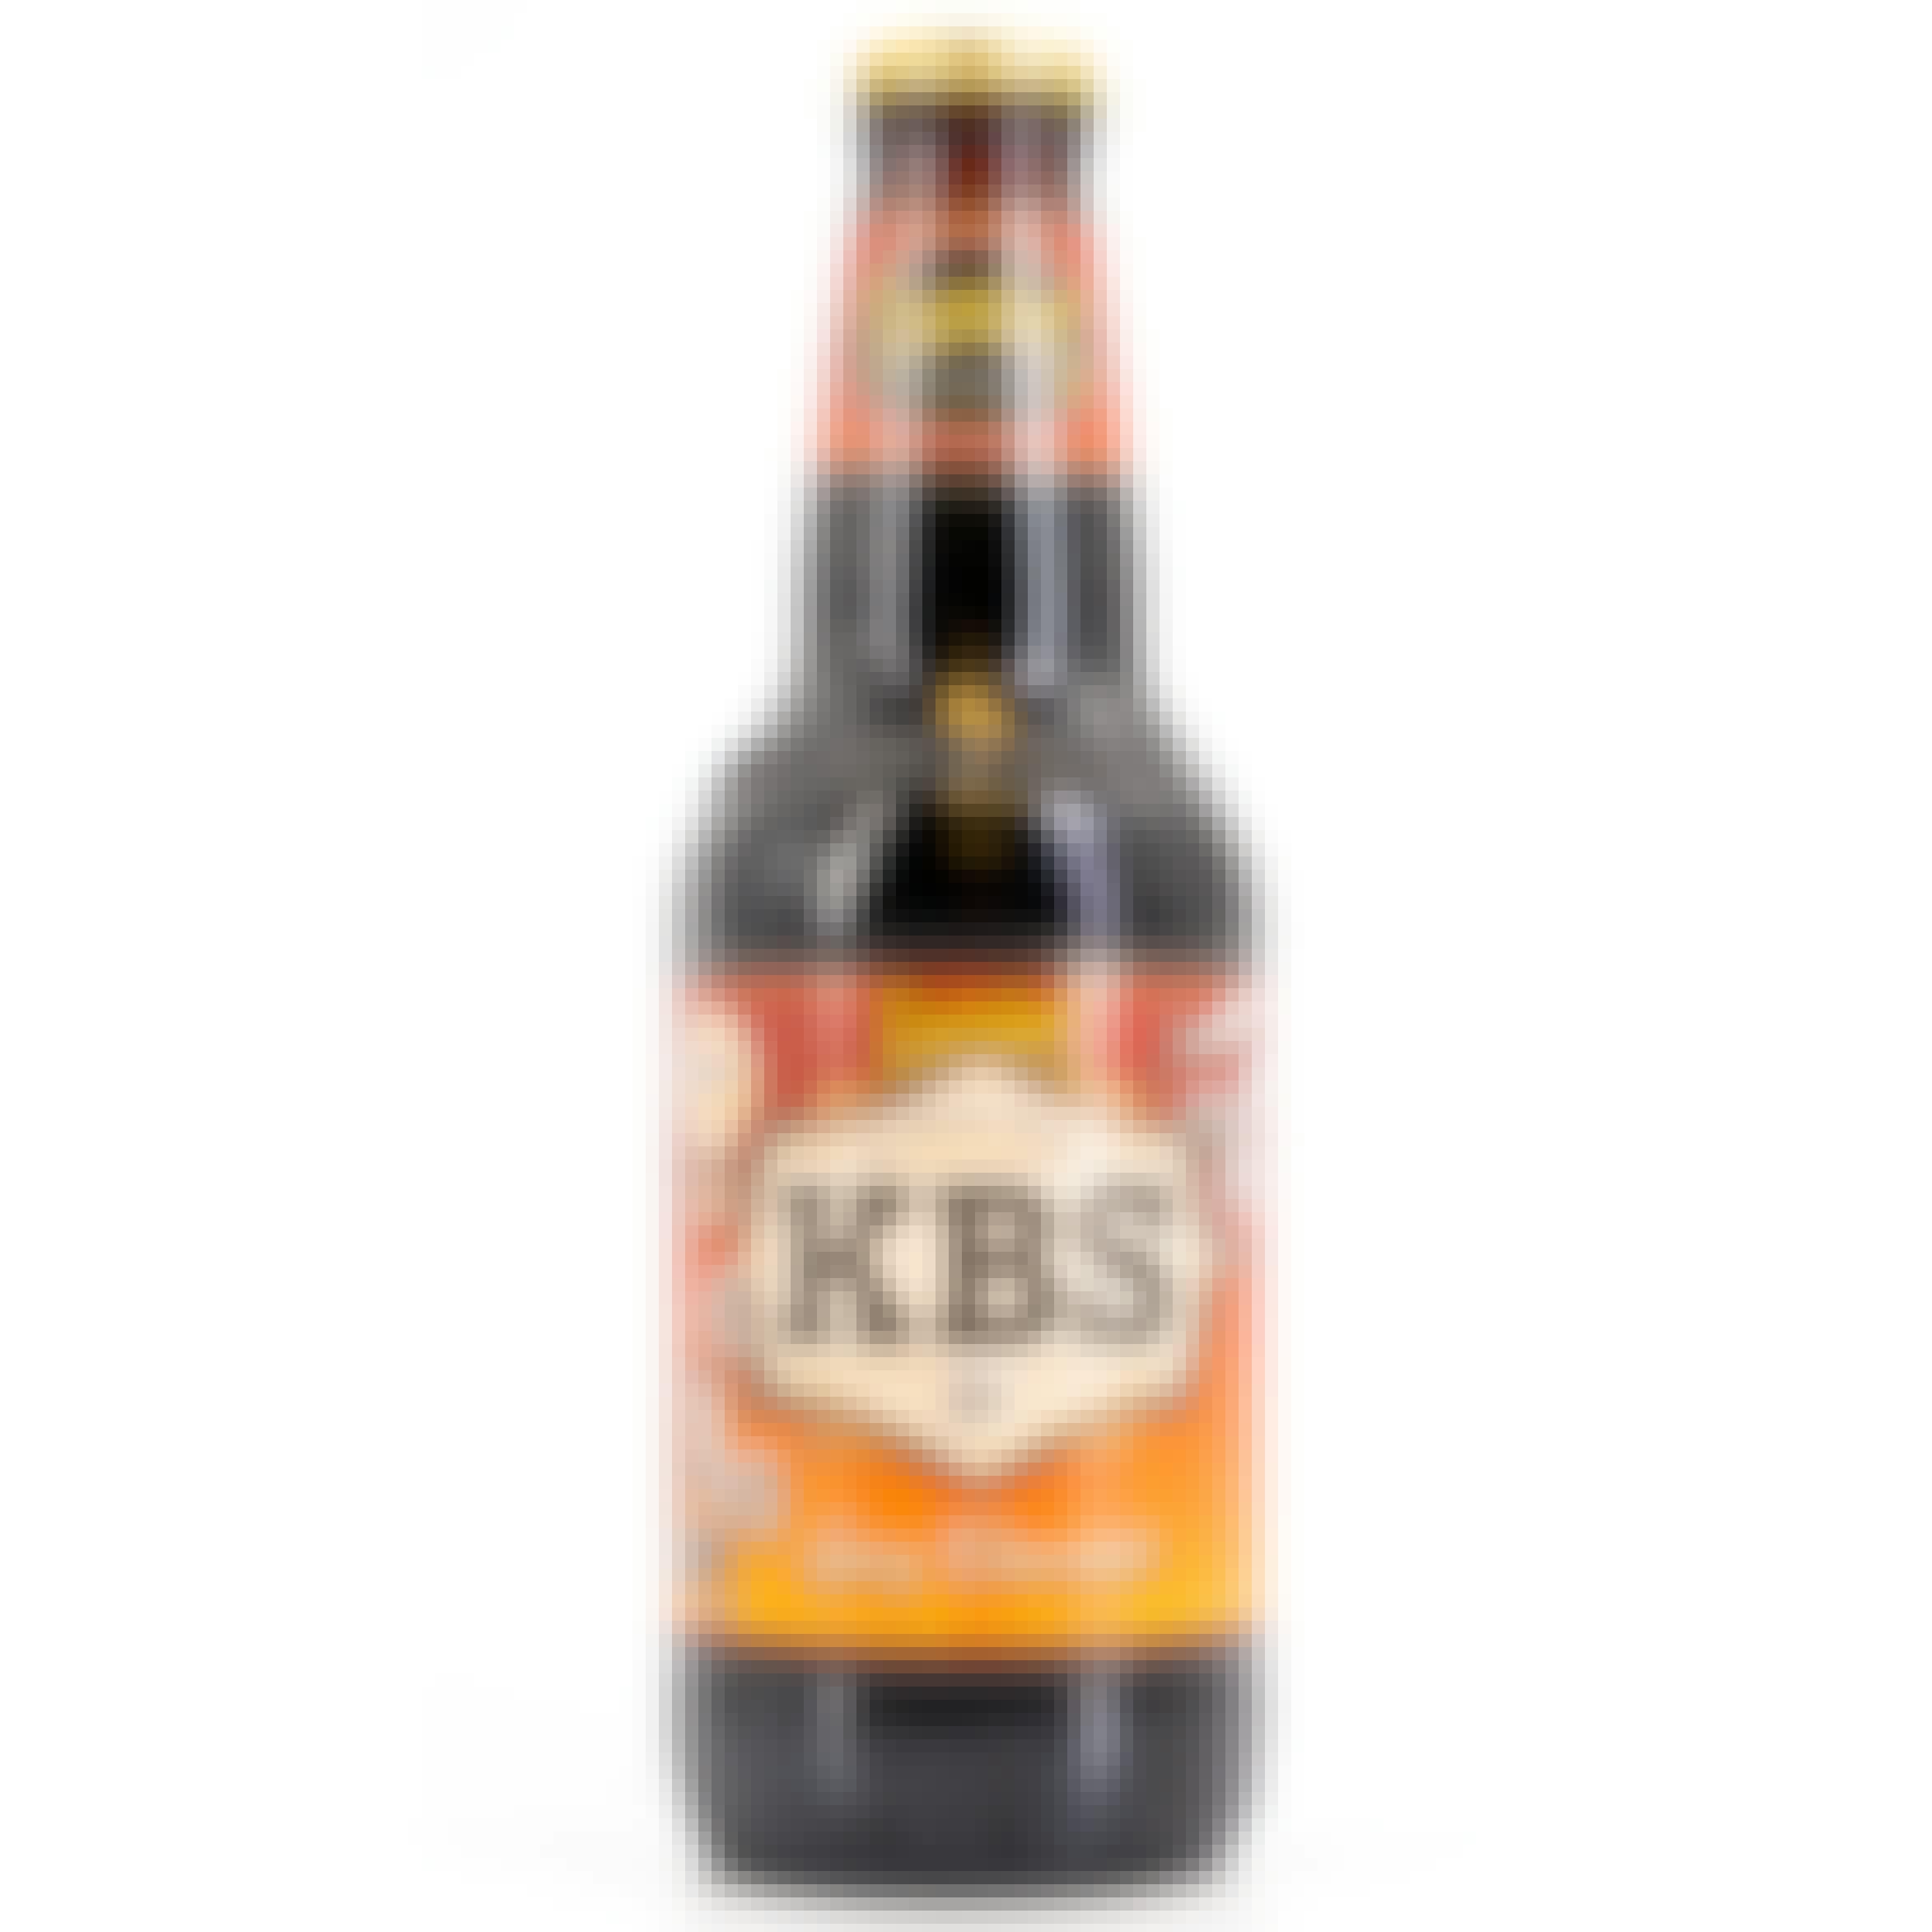 Founders KBS: Spicy Chcolate 4 pack 12 oz. Bottle